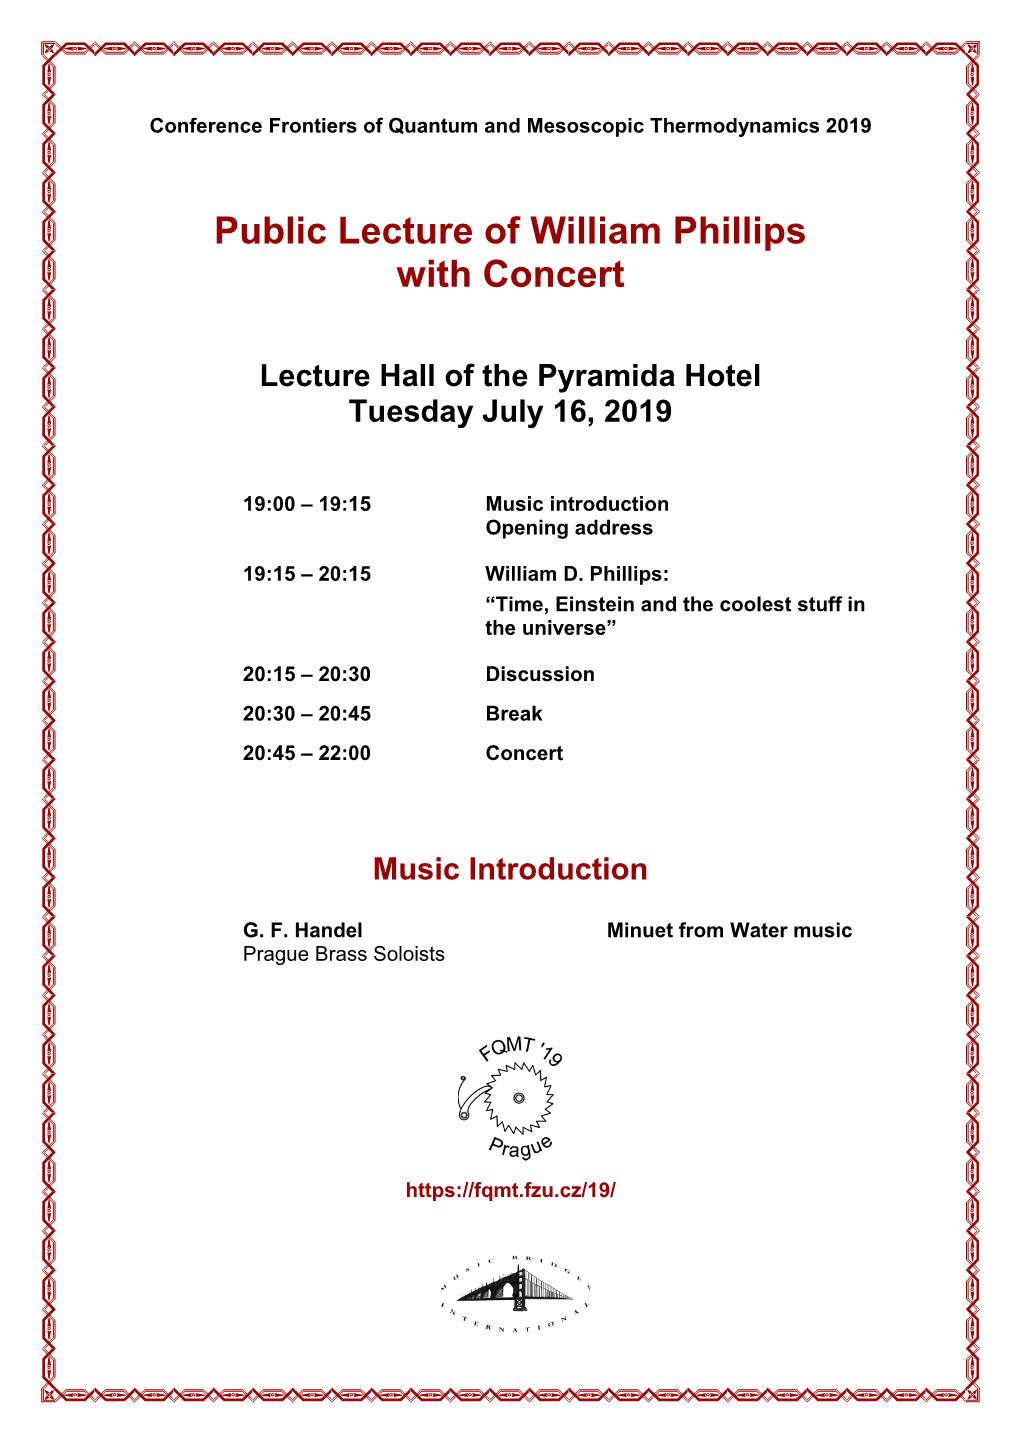 Public Lecture of William Phillips and Concert of Classical Music In